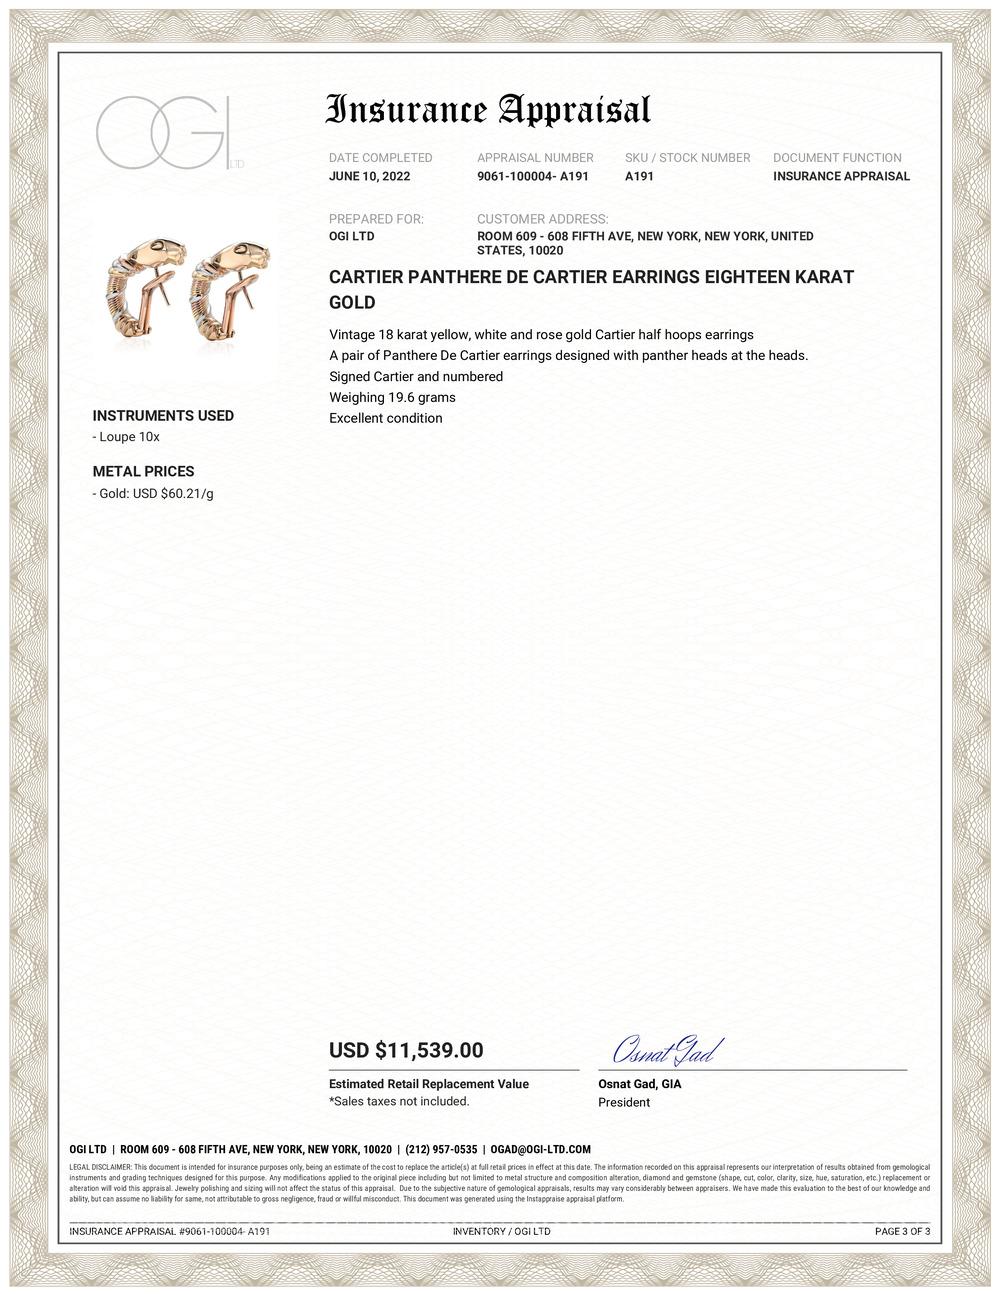 Vintage 18 karat yellow, white and rose gold Cartier half hoops earrings
A pair of Panthere De Cartier earrings designed with panther heads at the heads.
Signed Cartier and numbered
Weighing 19.6 grams
Cartier collection Panthere De Cartier was